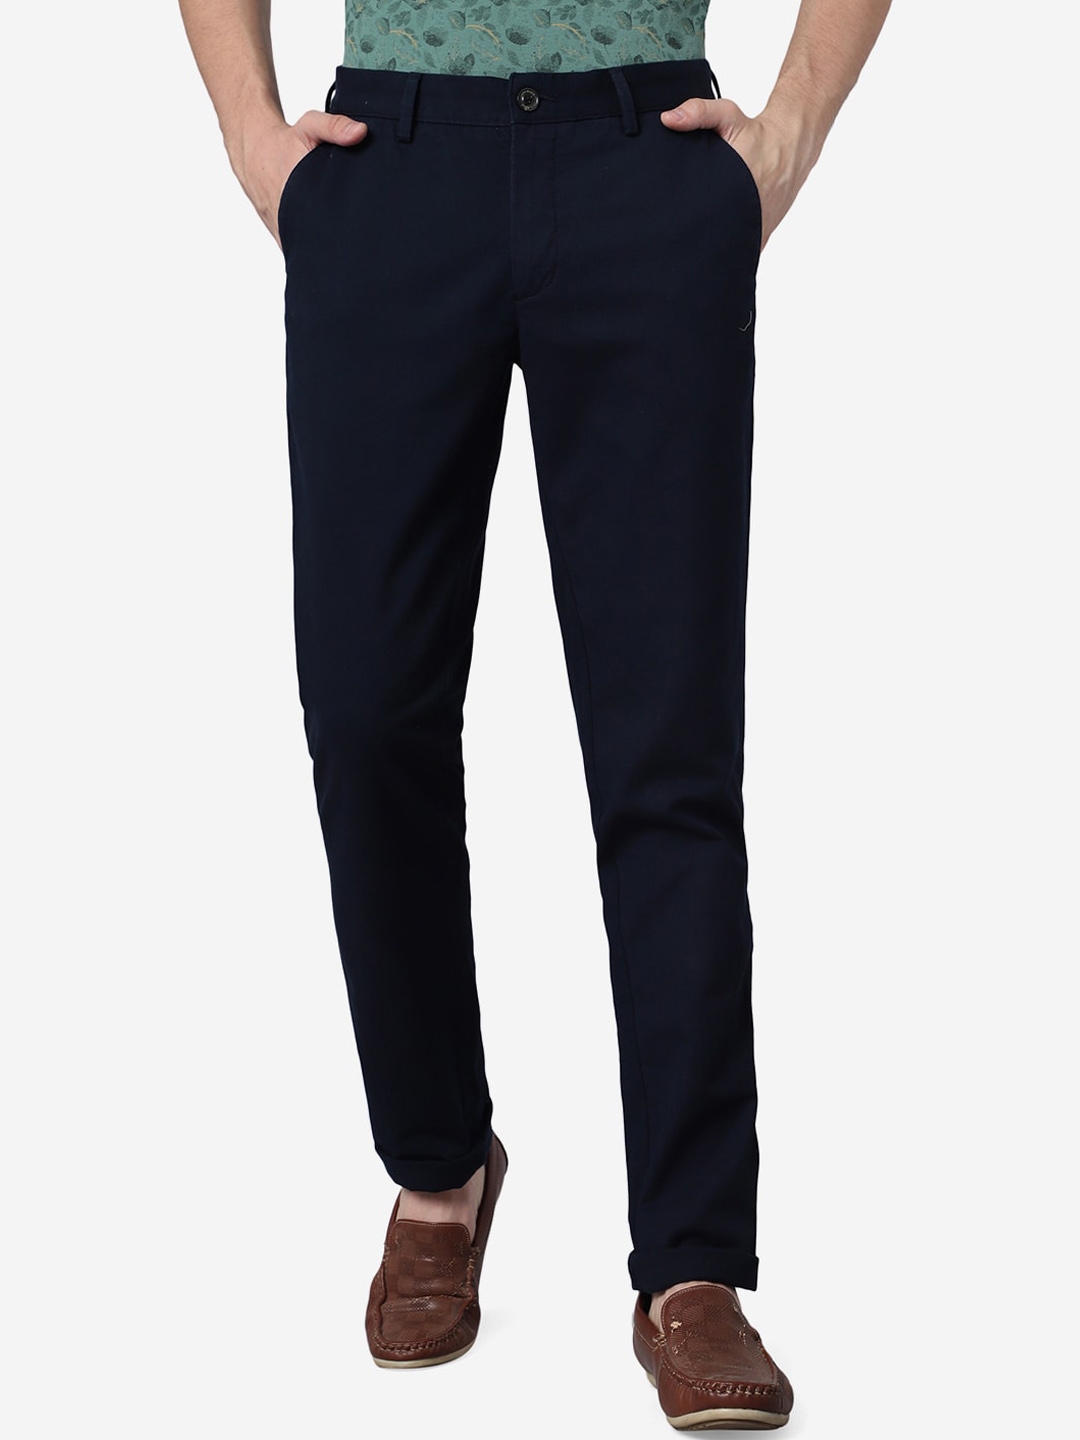 Buy JADE BLUE Men Mid Rise Slim Fit Pure Cotton Chinos Trousers ...